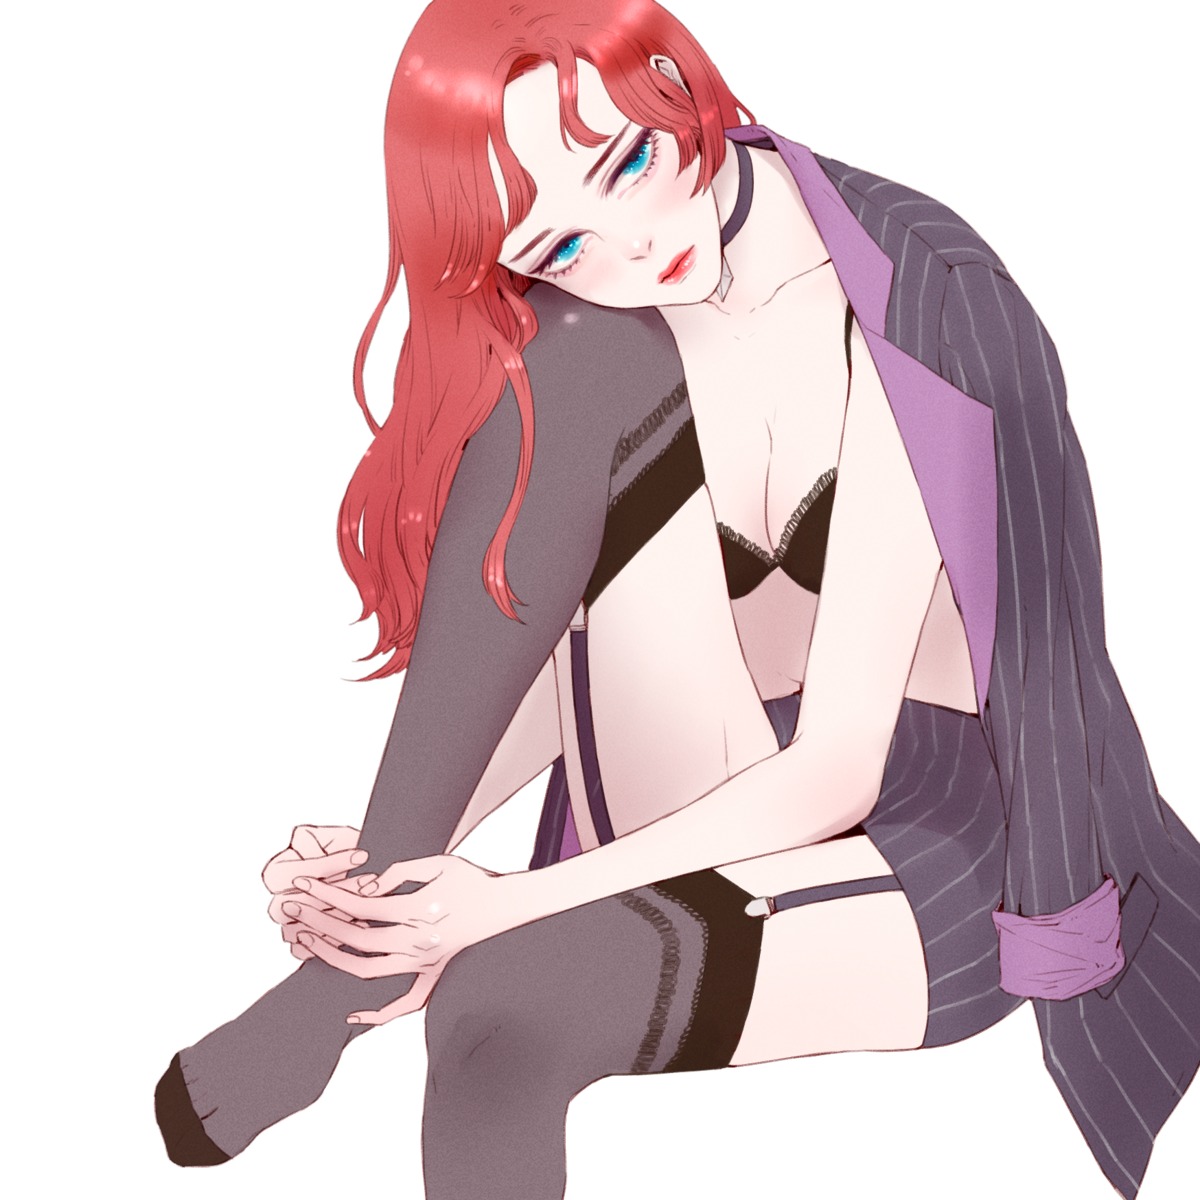 bra business_suit cleavage heather37 league_of_legends miss_fortune stockings thighhighs